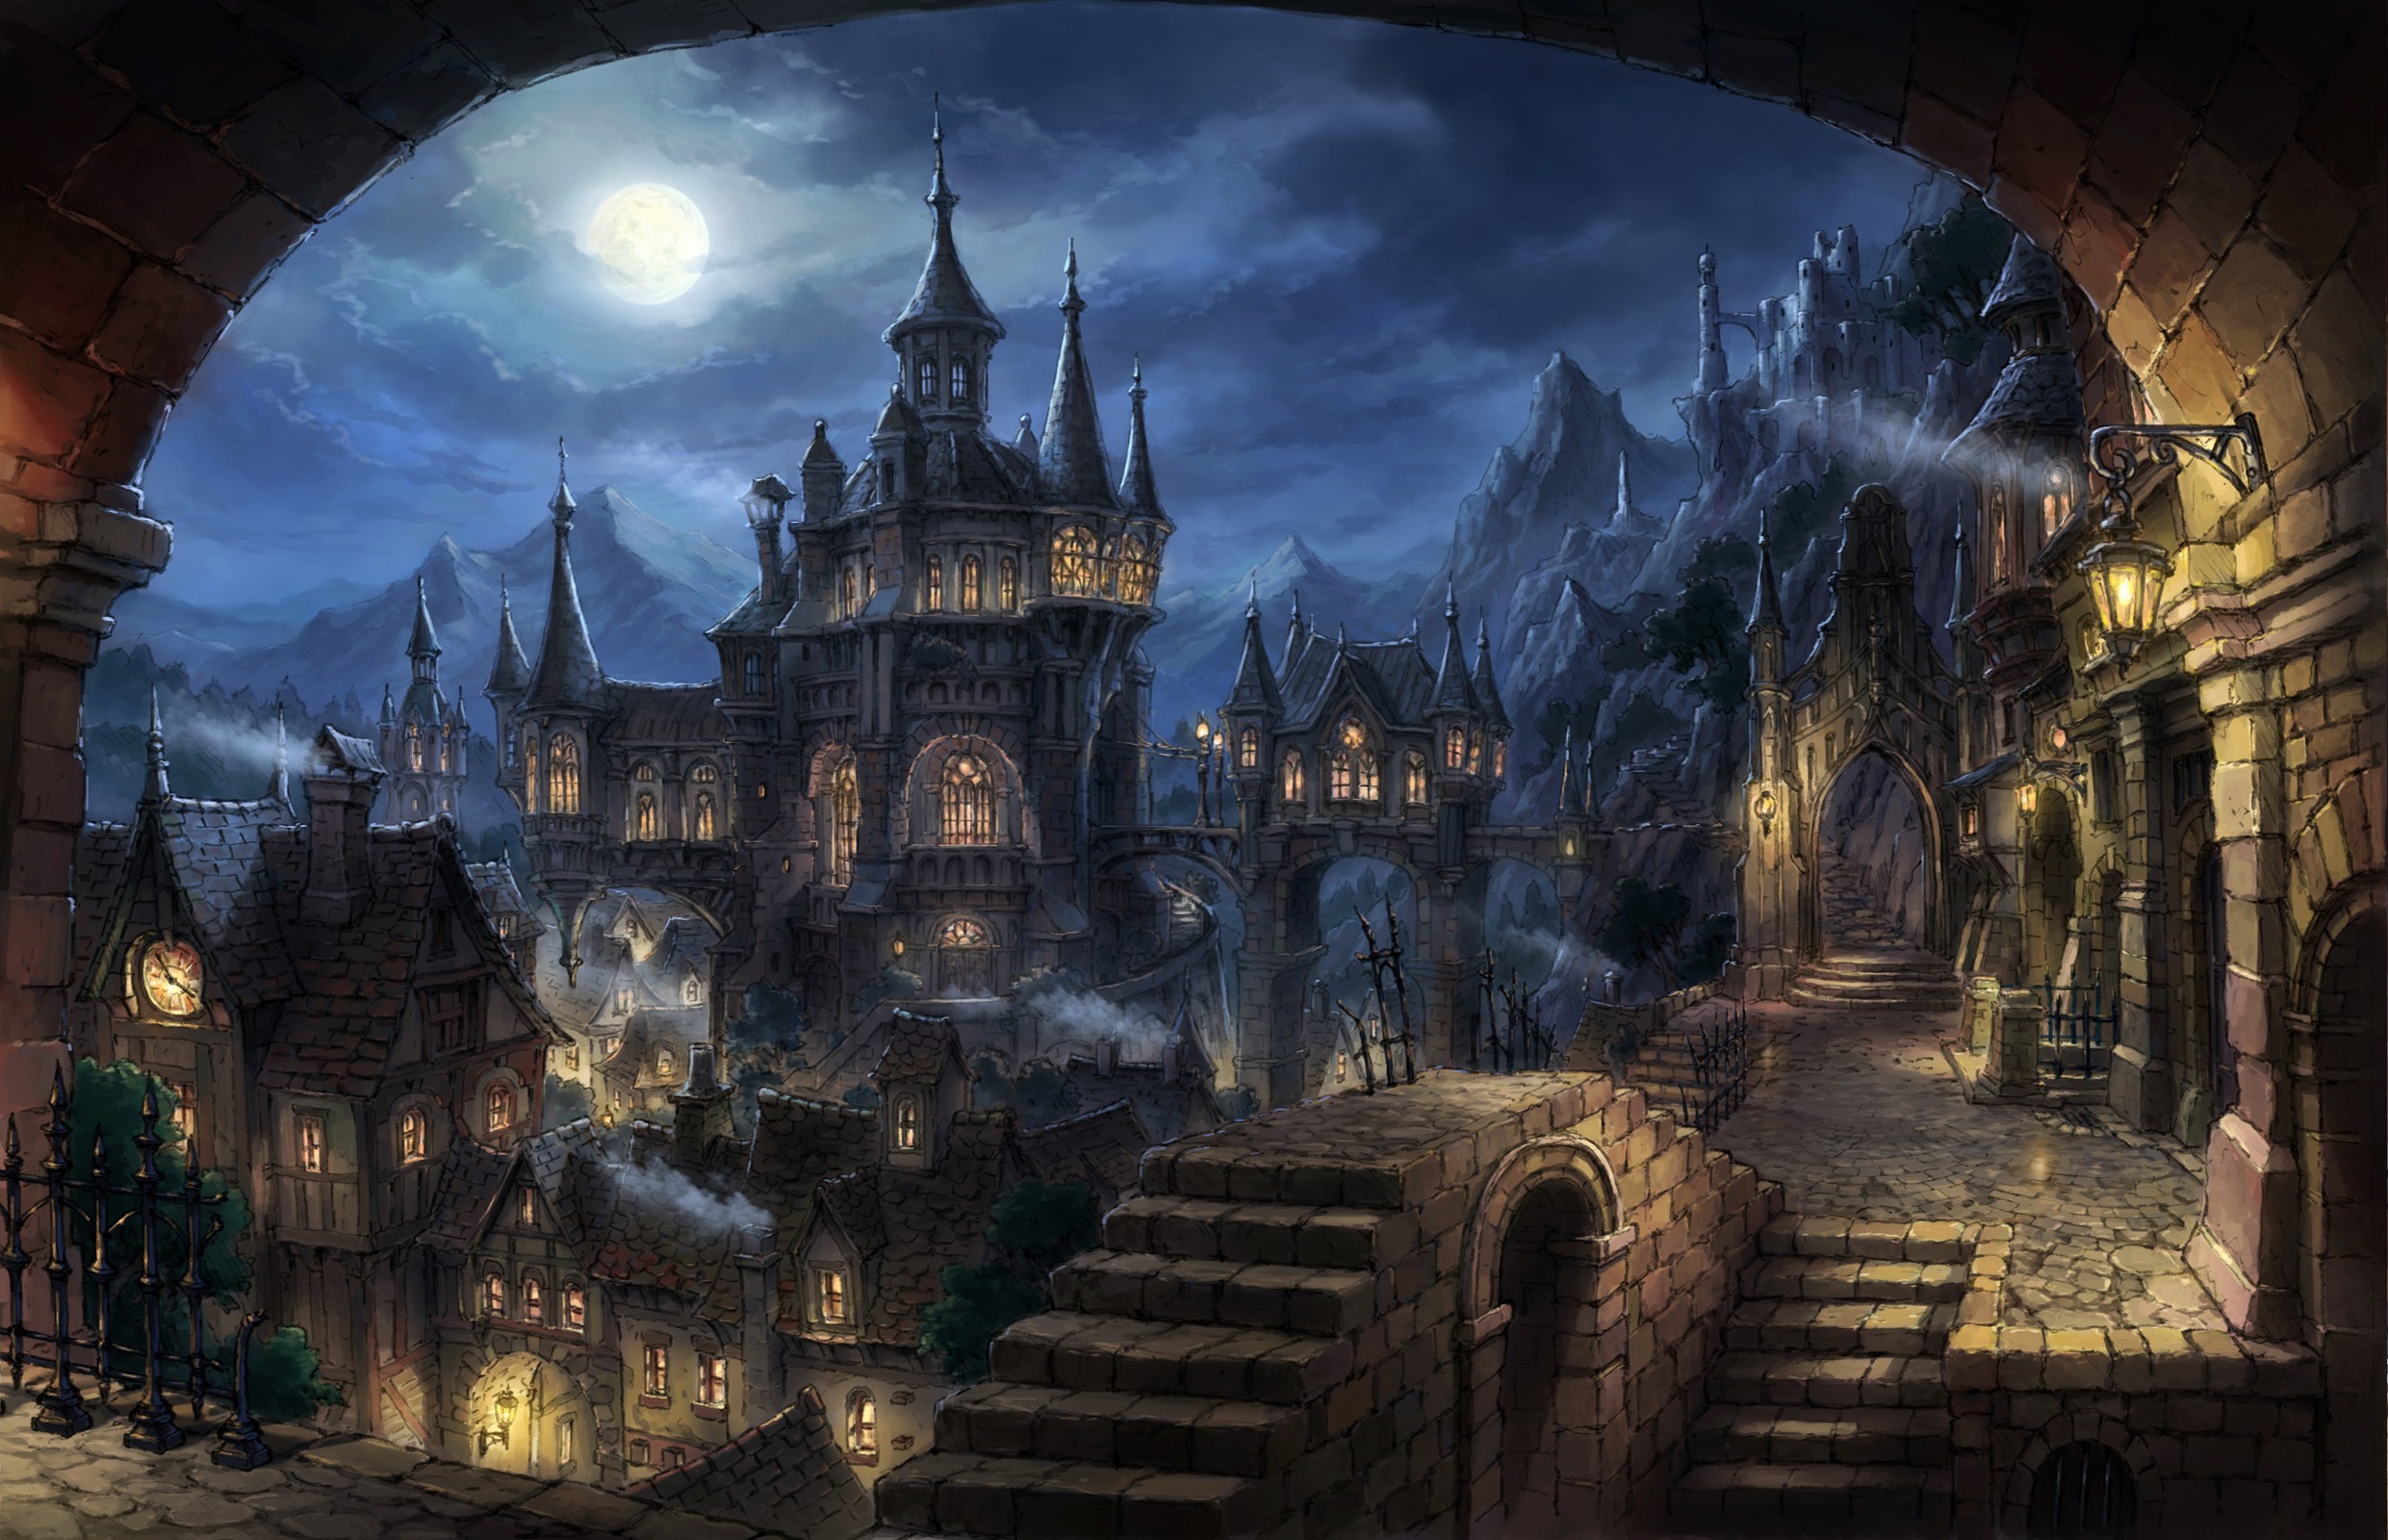 2481x1600 Awesome Fantasy Art Wall Paper | Fantasy Art Wallpapers ...